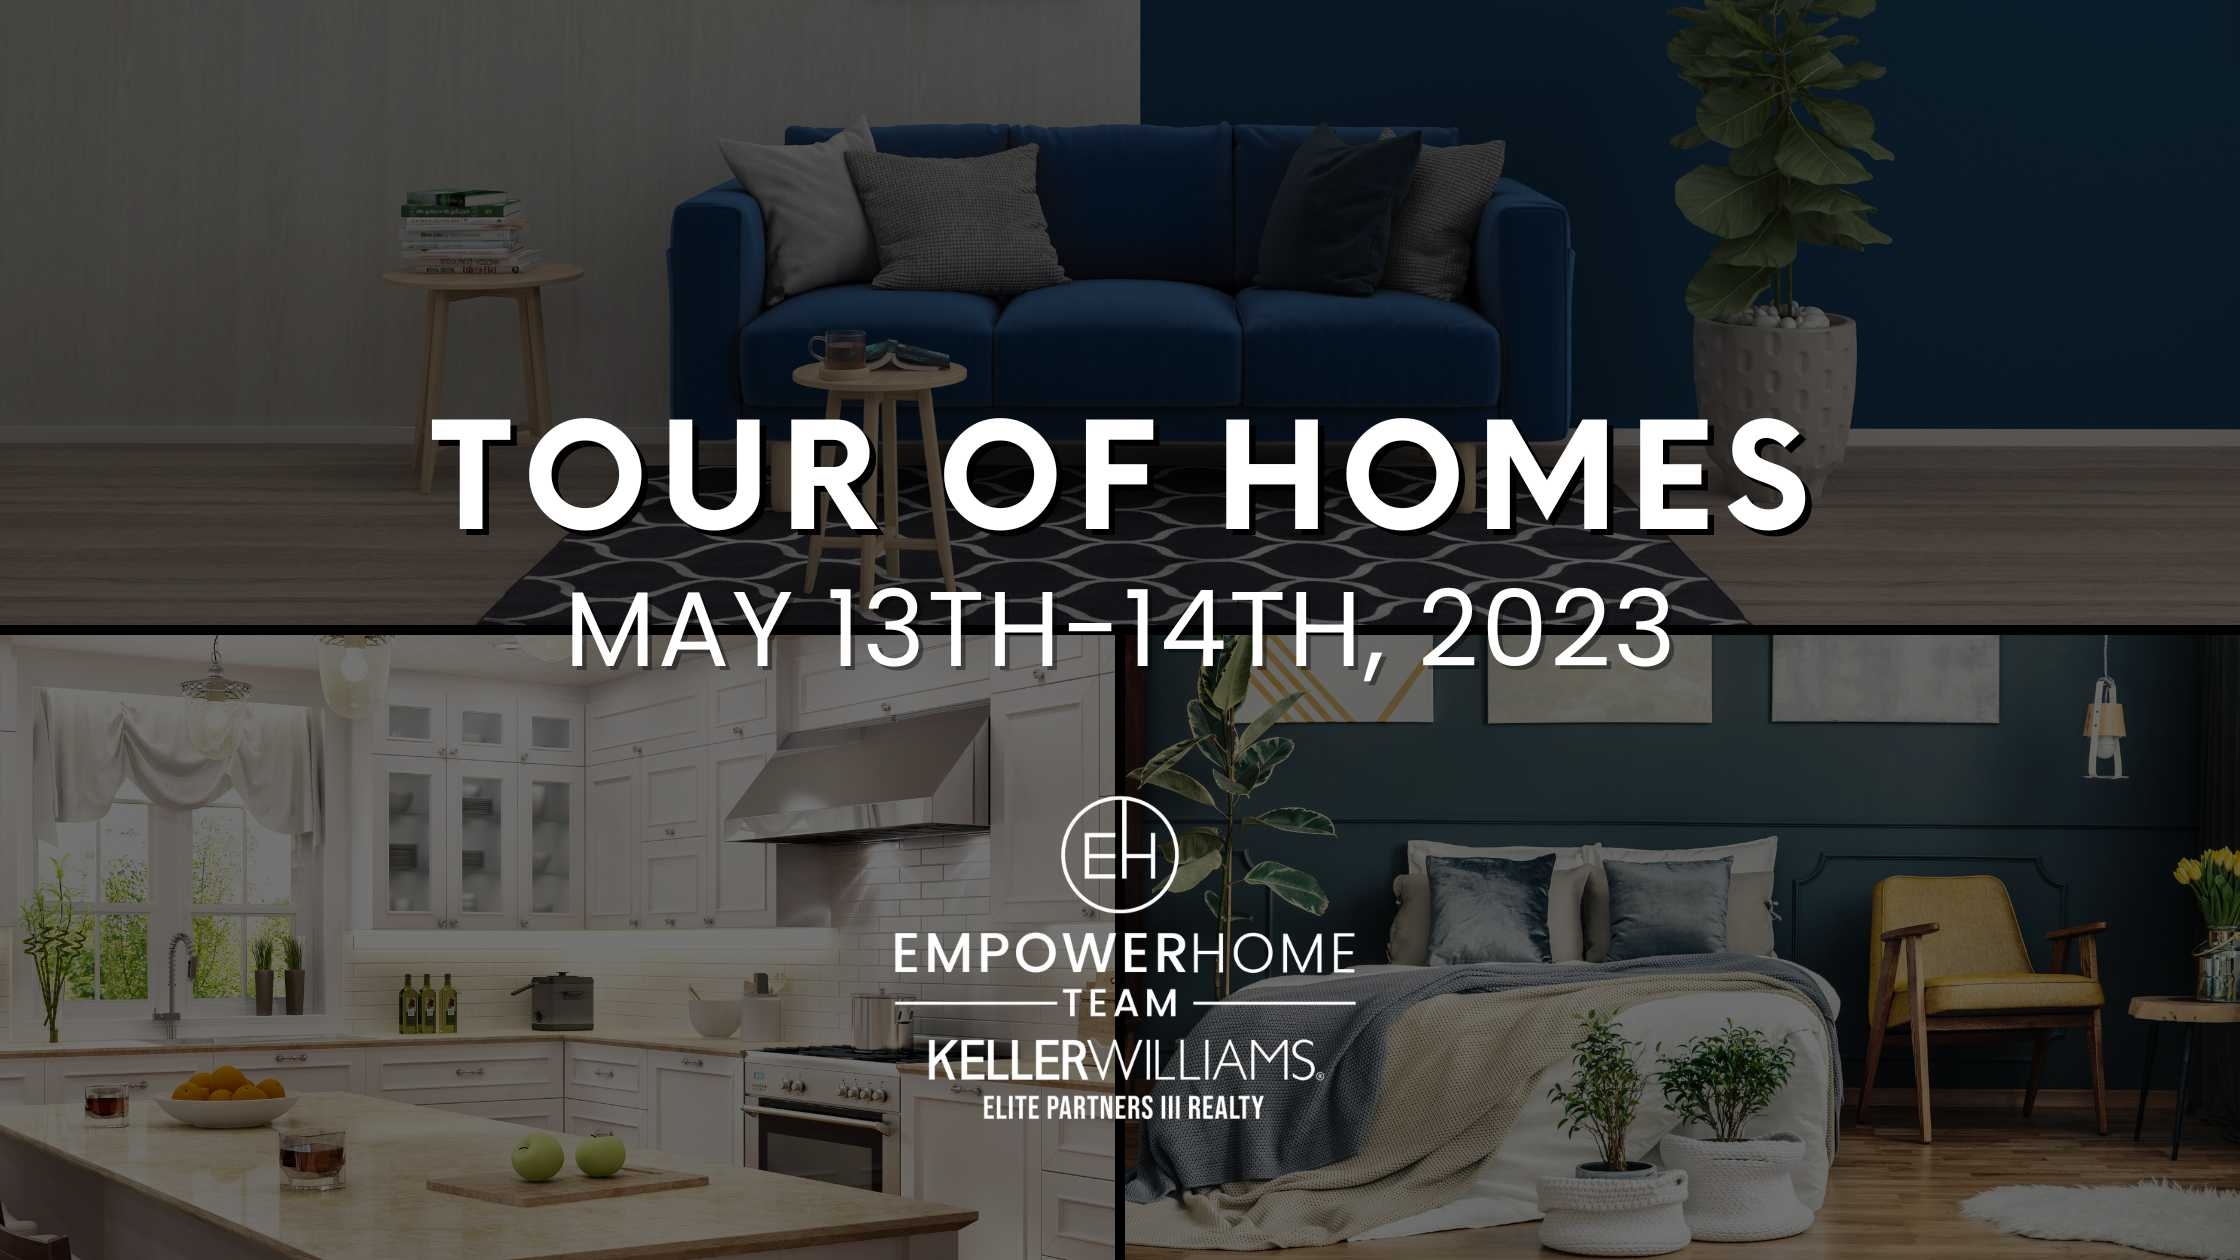 Orlando Tour of Homes In-Person May 13-14